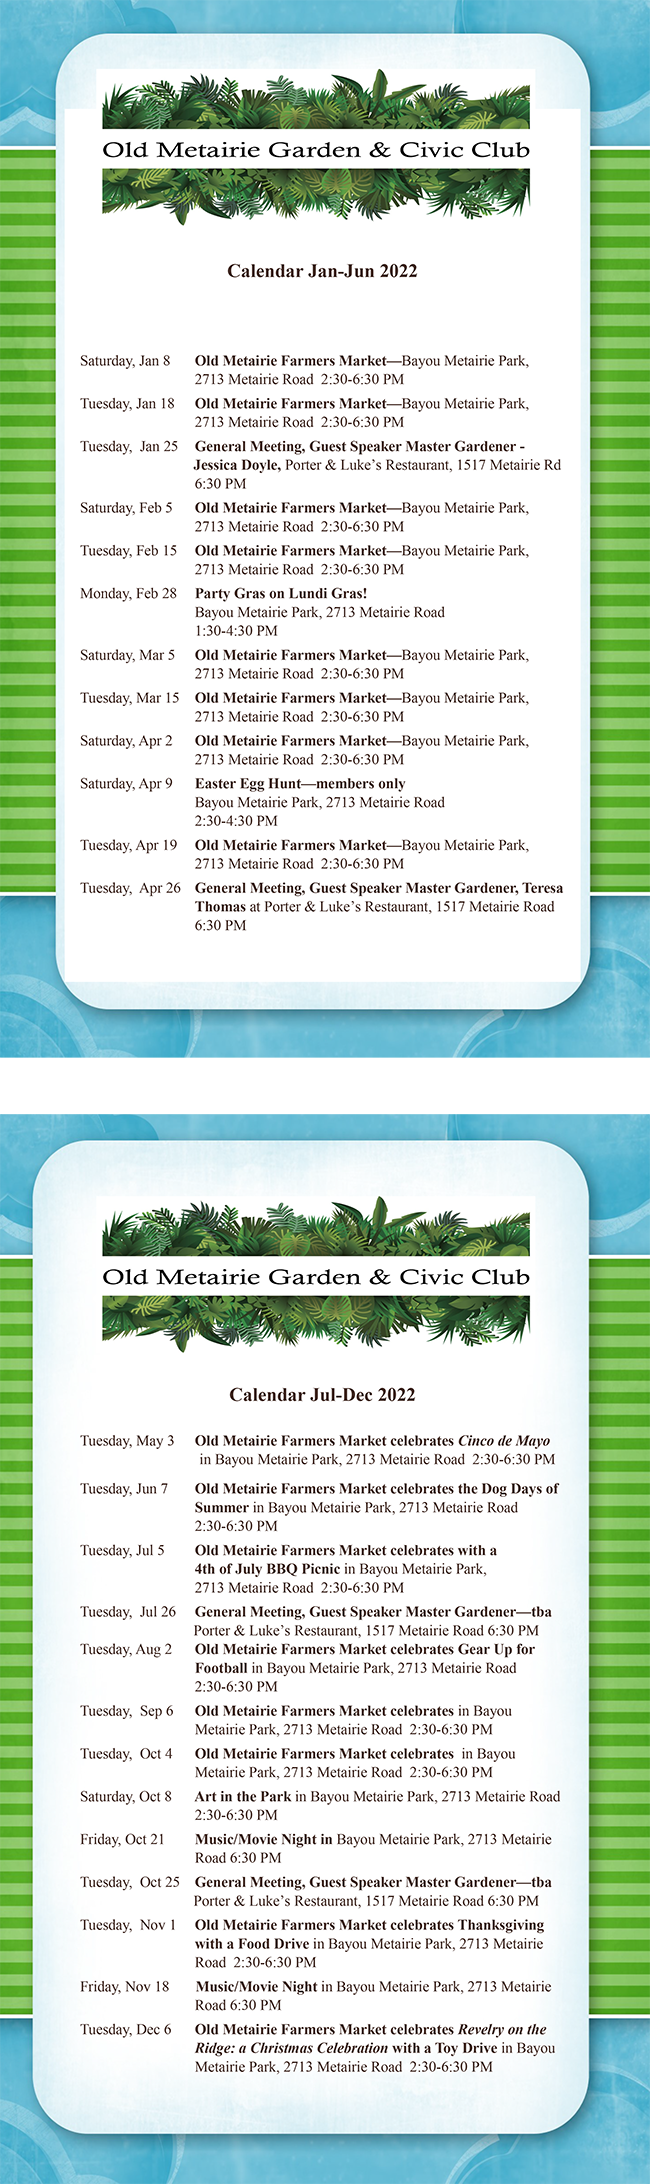 Old Metairie Garden & Civic Club Calendar of events